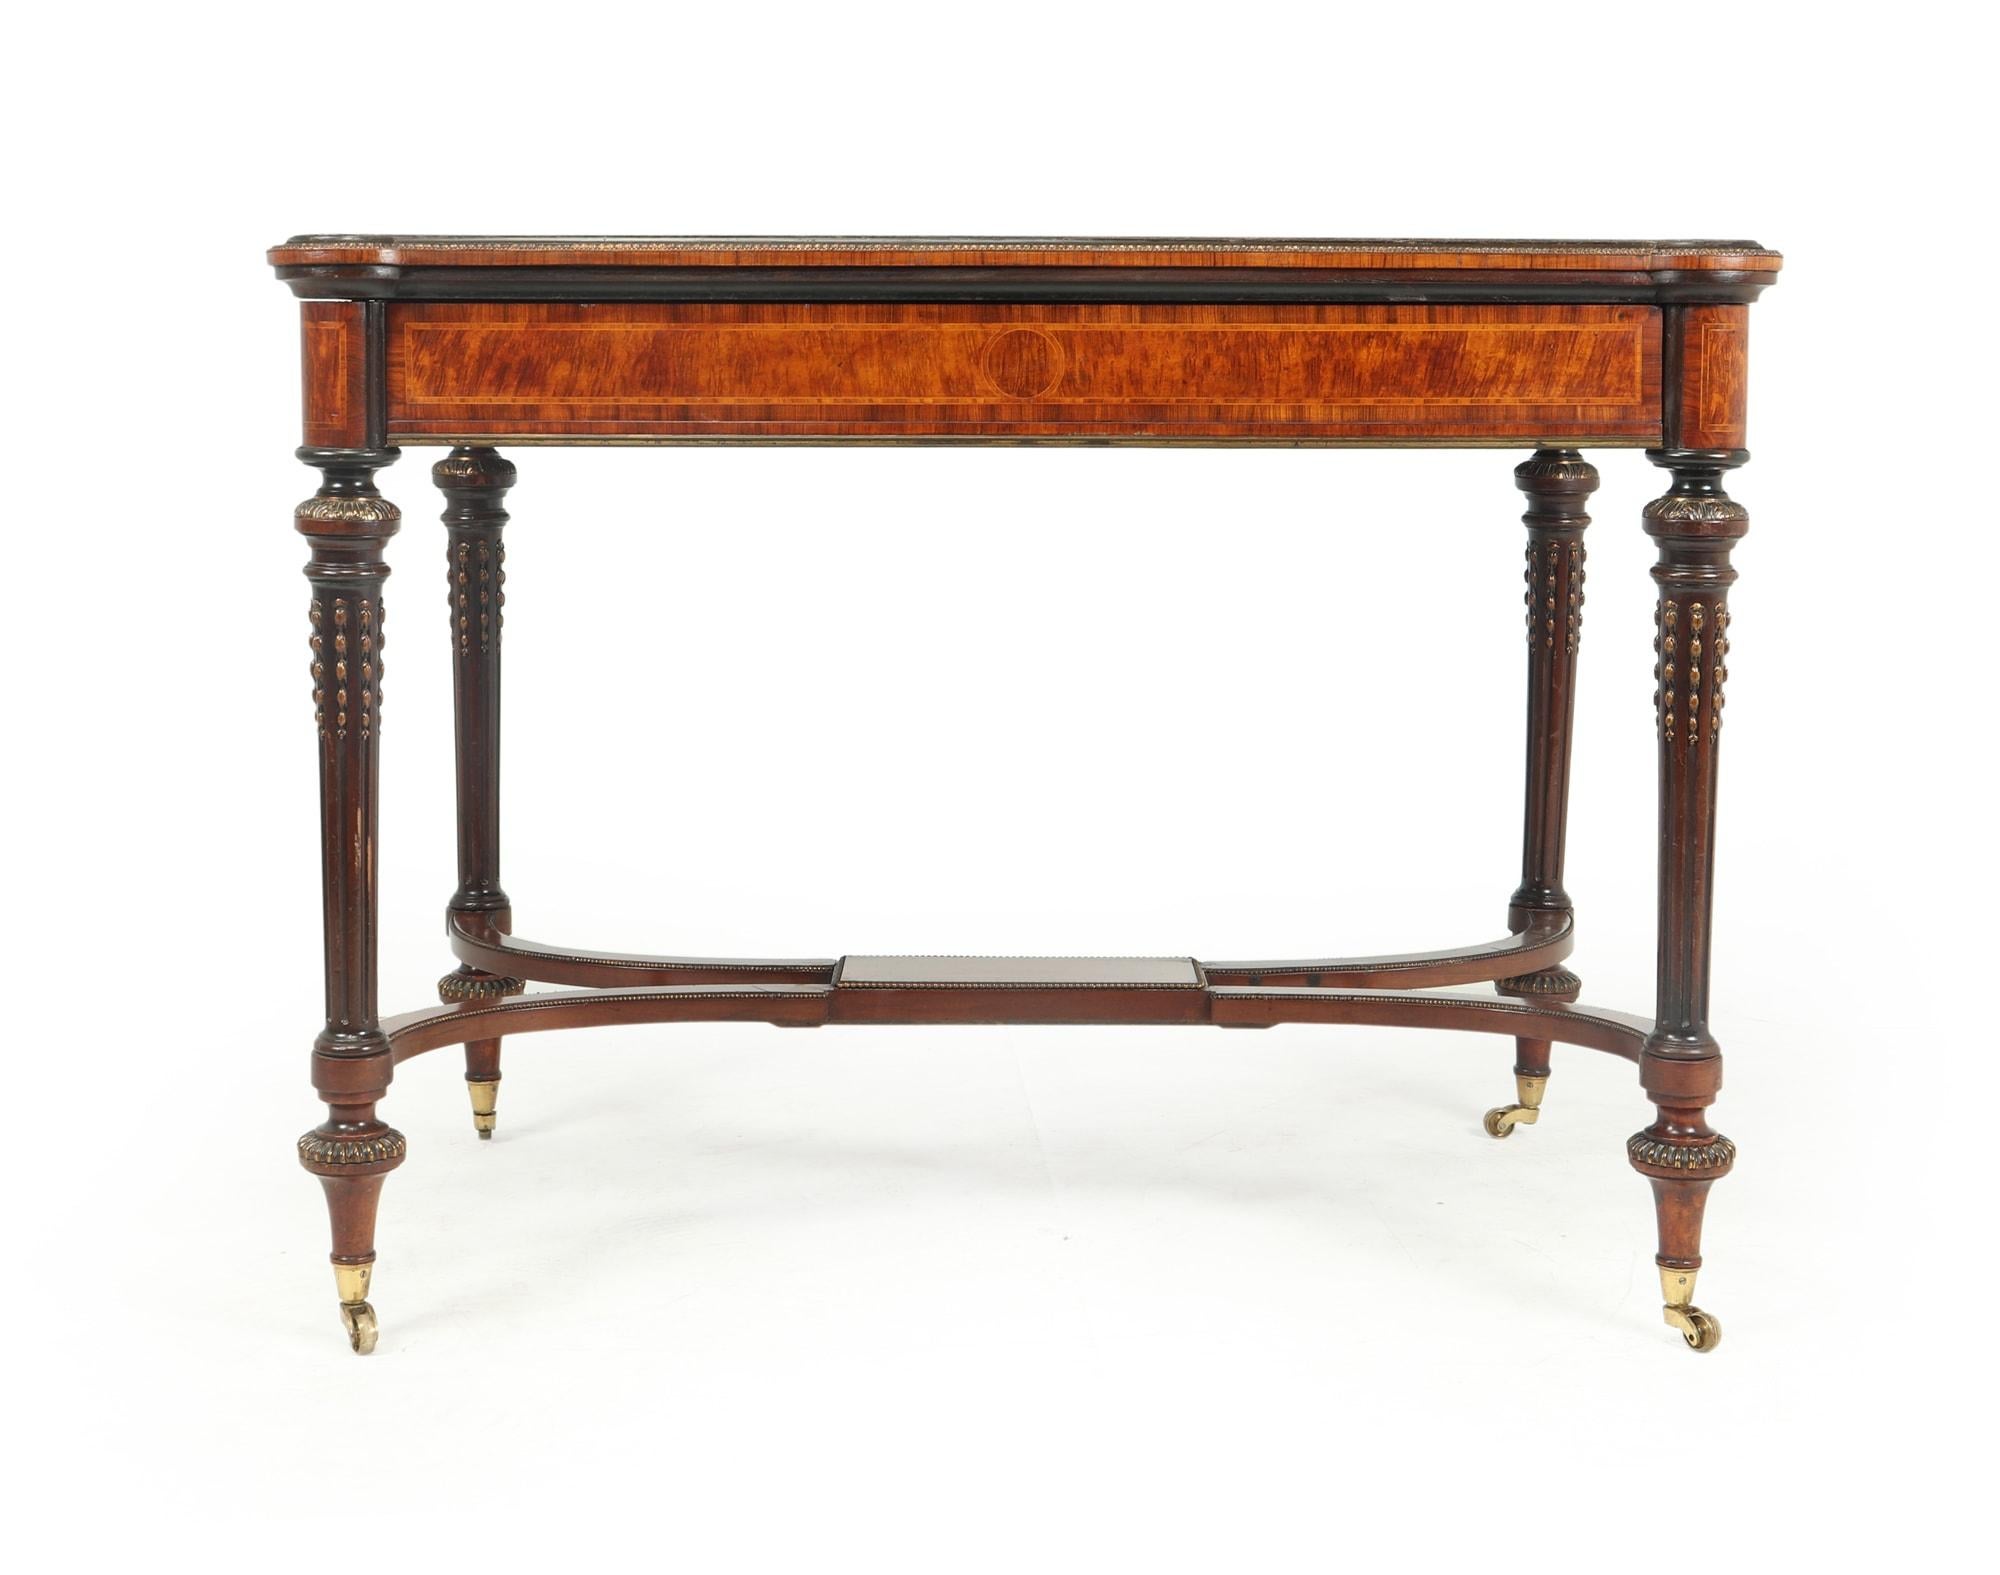 A lovely antique burr walnut writing table produced in England around 1880 in the manner of Louis XVI furniture, great quality inlay and brass mounts, single drawer with hand cut dovetail joints turned and reeded leg and finished with castors, great